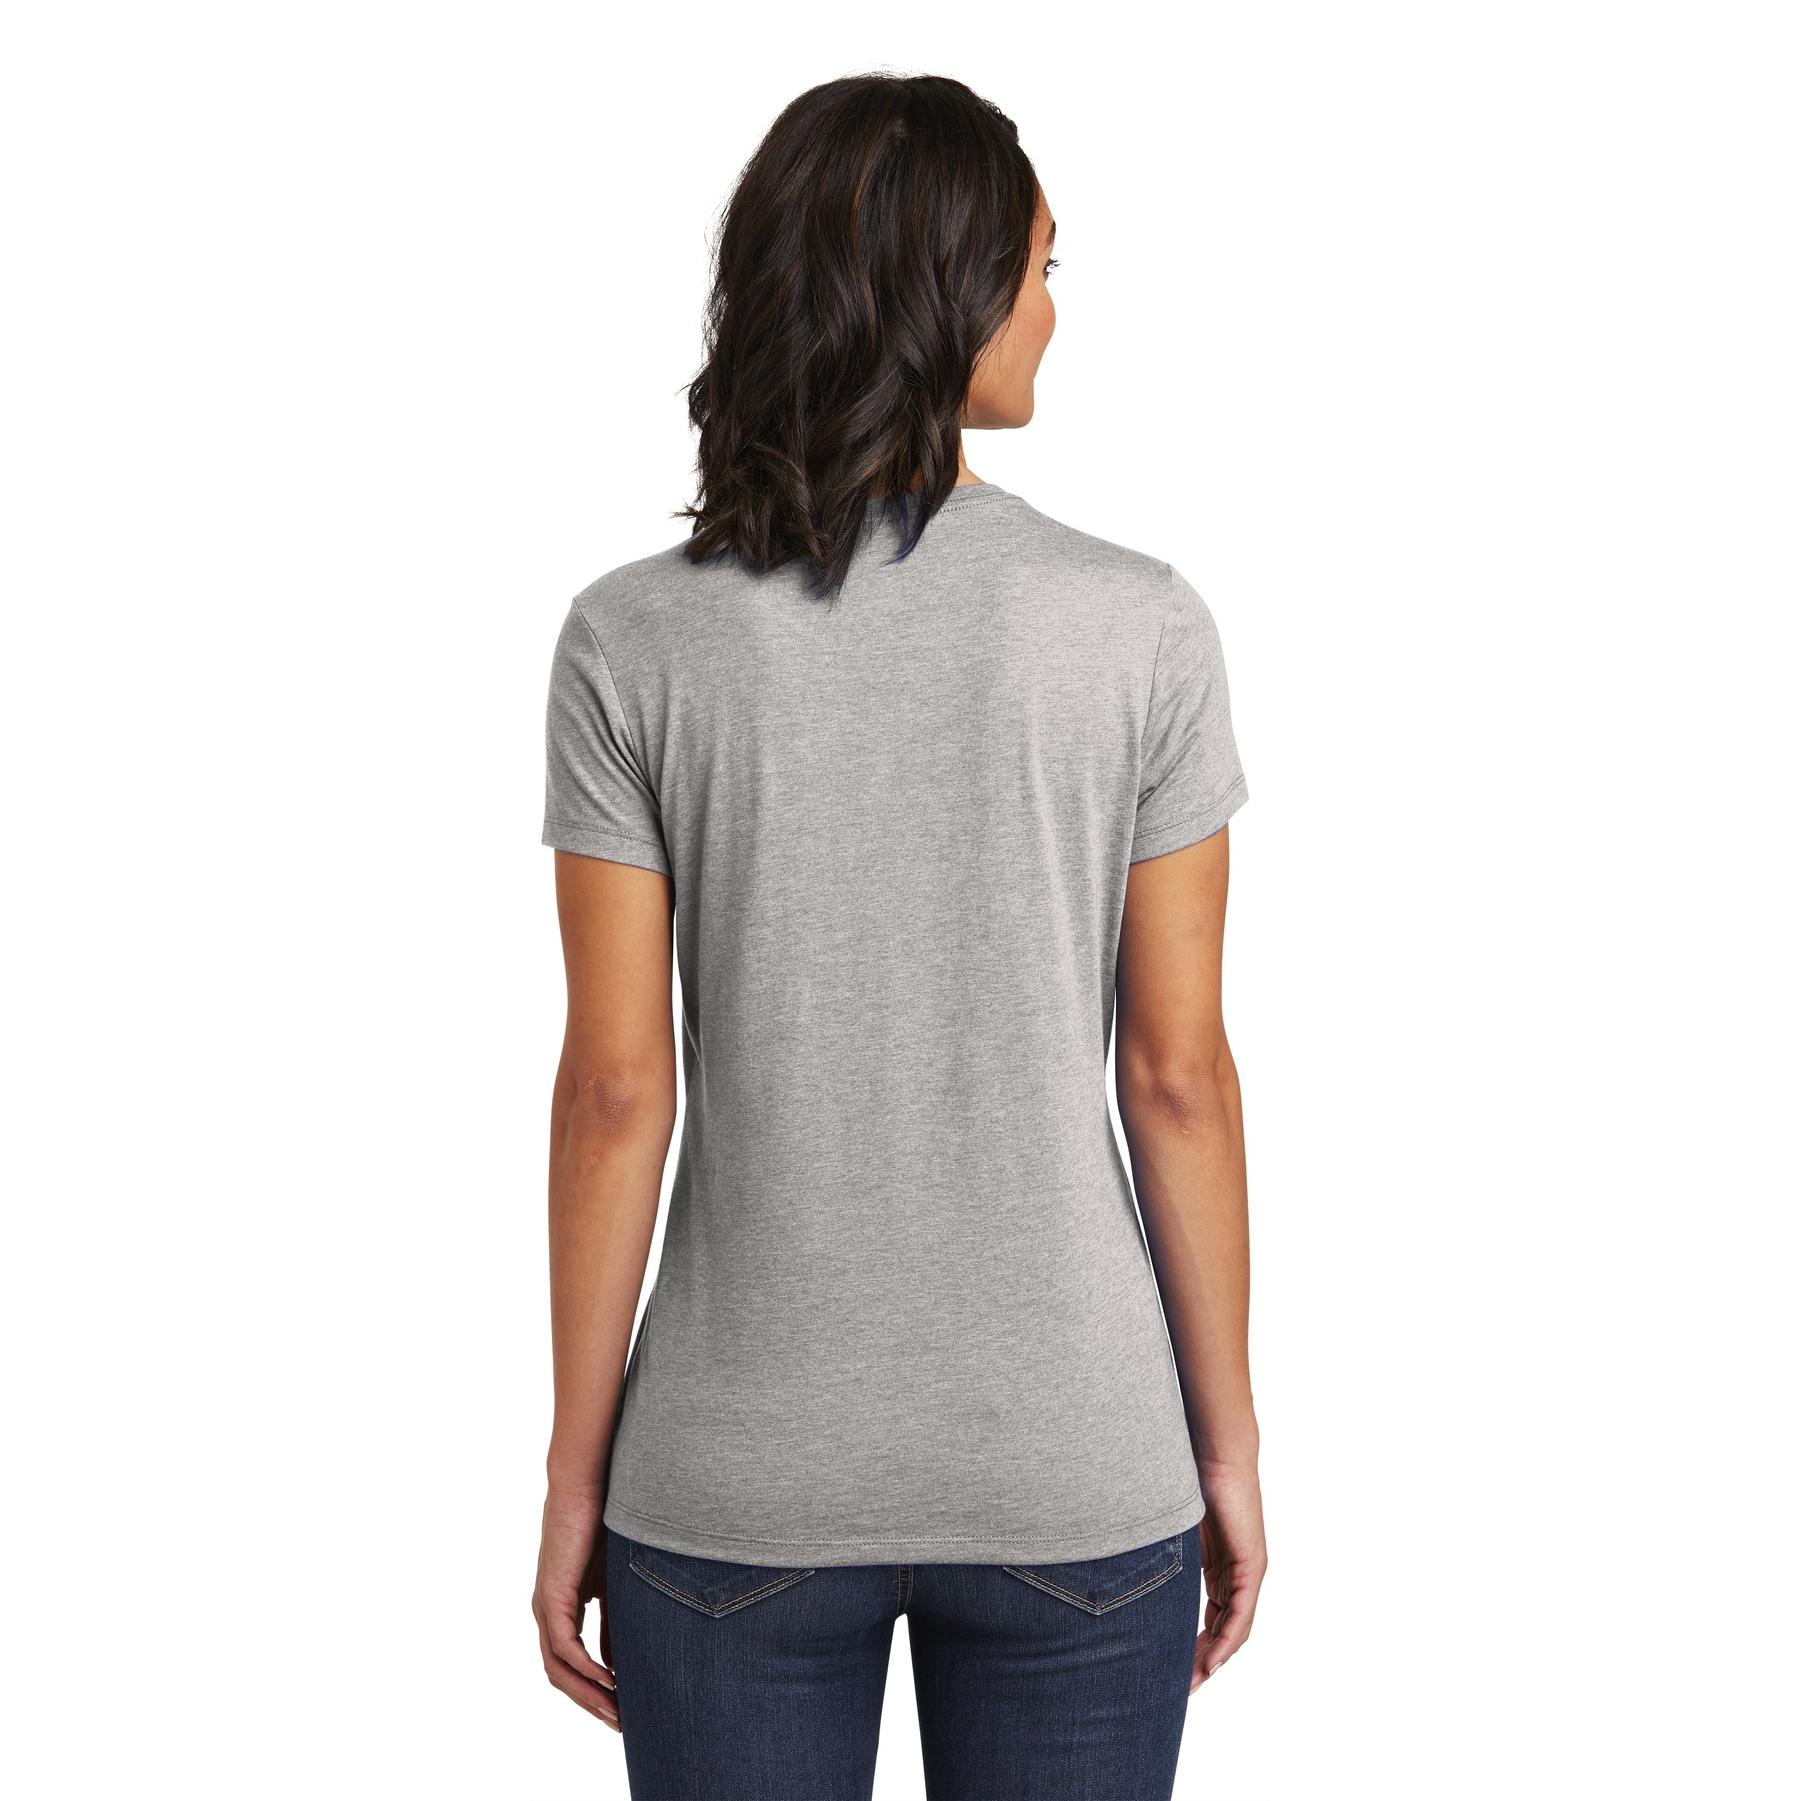 District DT6002 Women's Very Important Tee - Light Heather Grey | Full ...